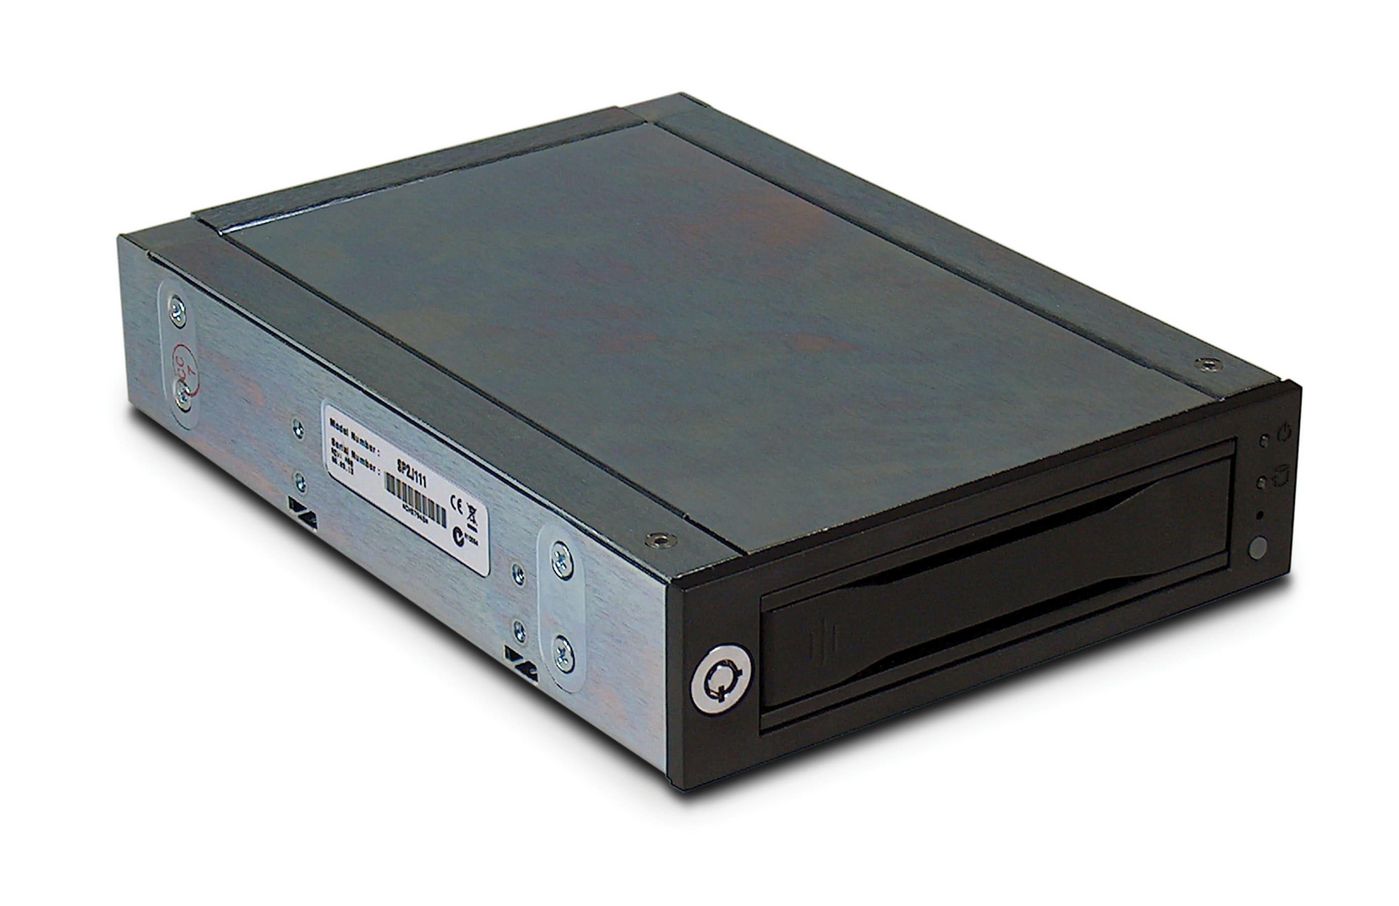 Removable Hard Drive Enclosure DX115 (Frame and Carrier)